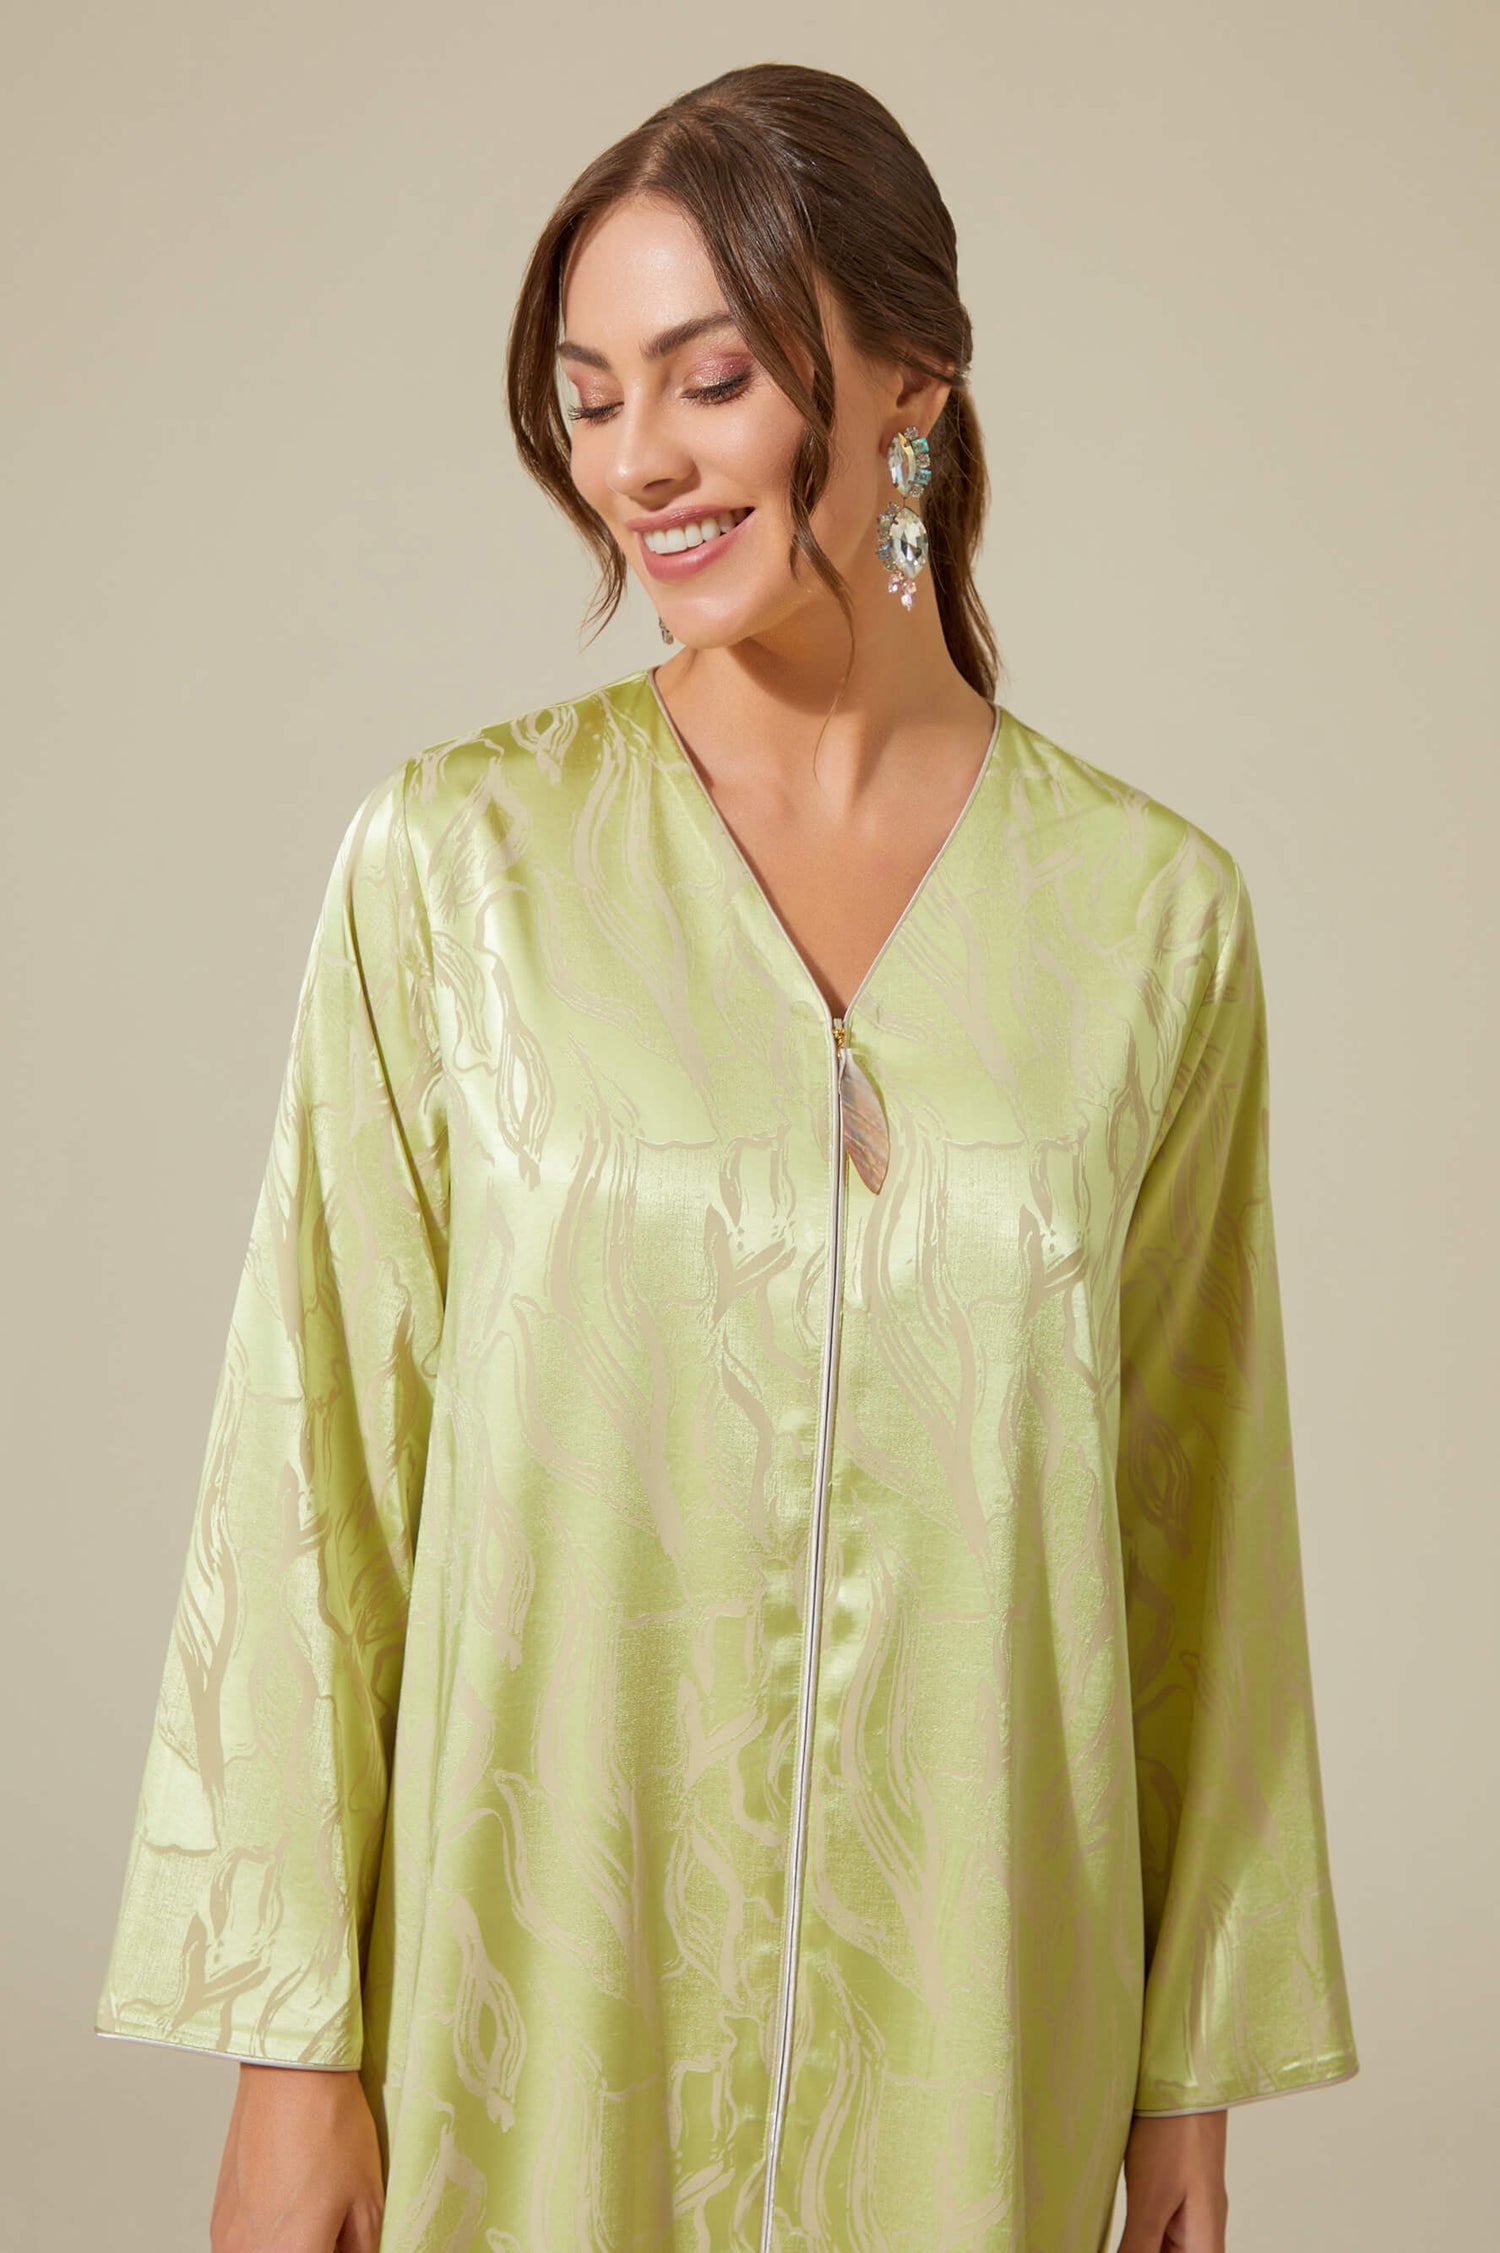 Sahara - Luxury Patterned and Zippered Rayon Full Length Dress - Pistachio Green